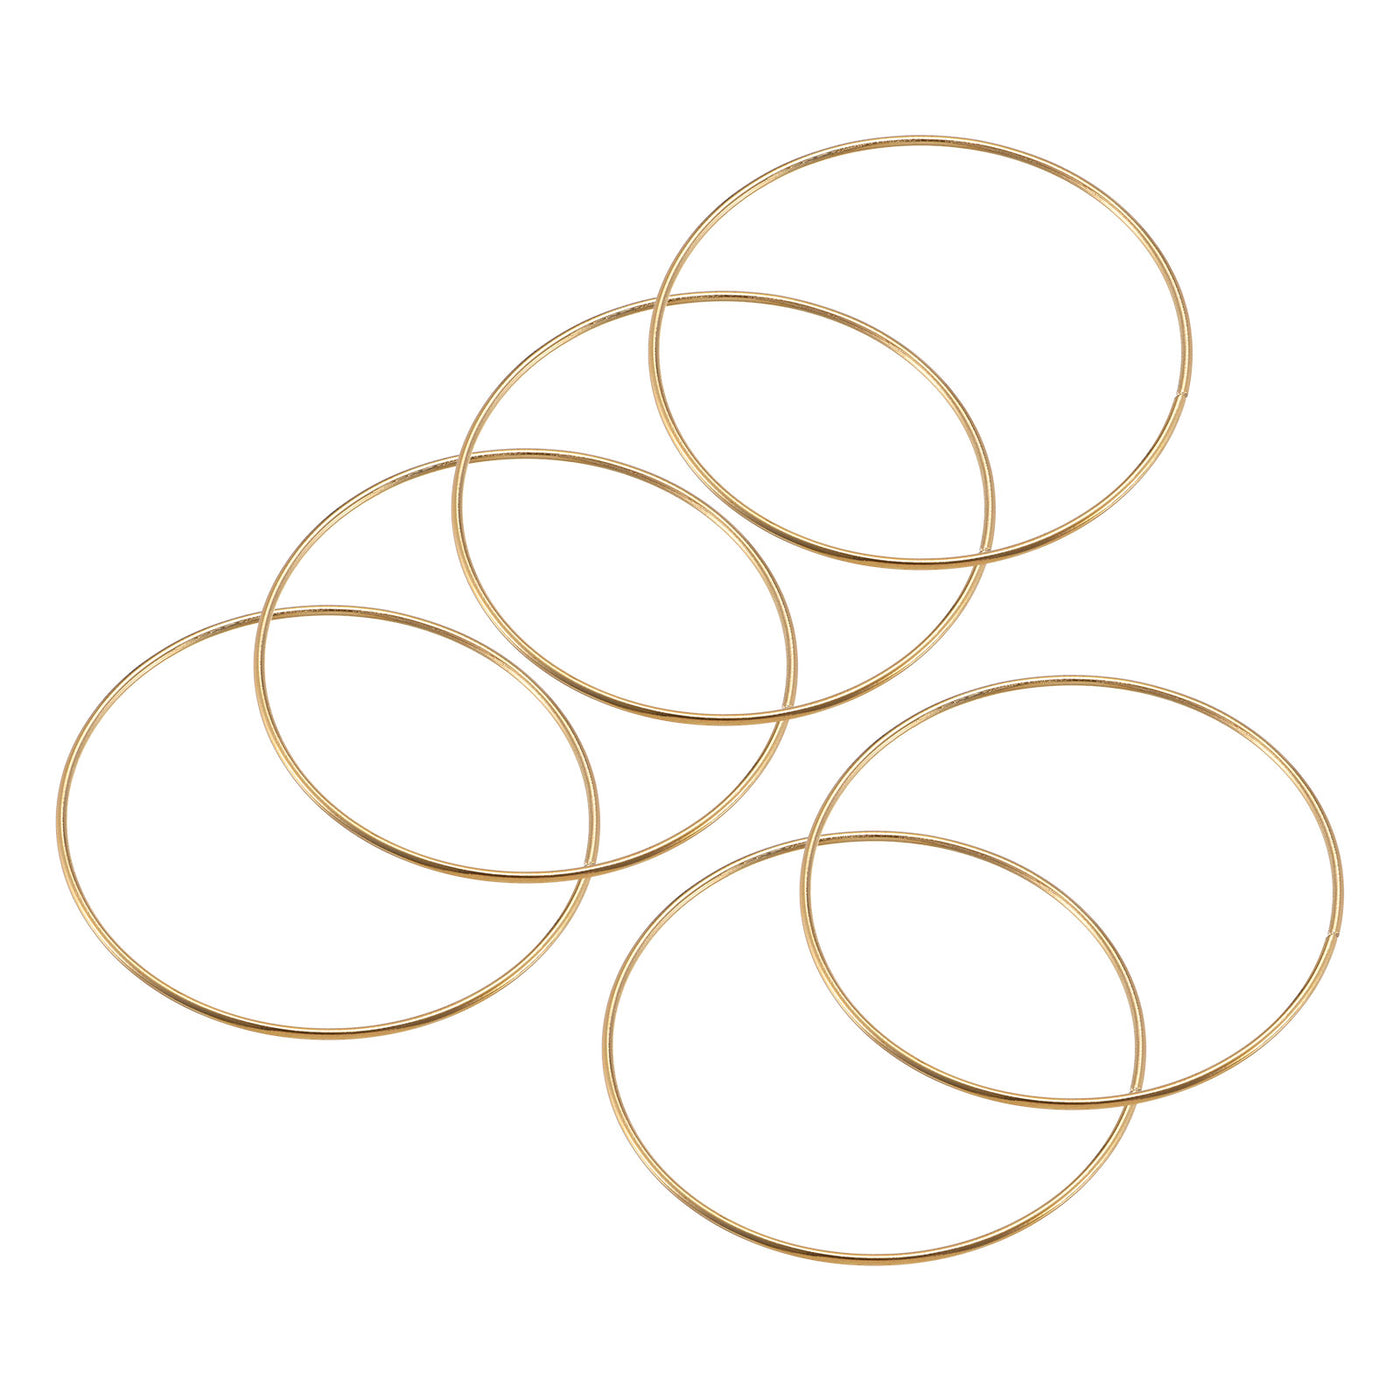 uxcell Uxcell 120mm(4.72") OD Metal O Ring Non-Welded Craft Hoops for DIY Gold Tone 10pcs